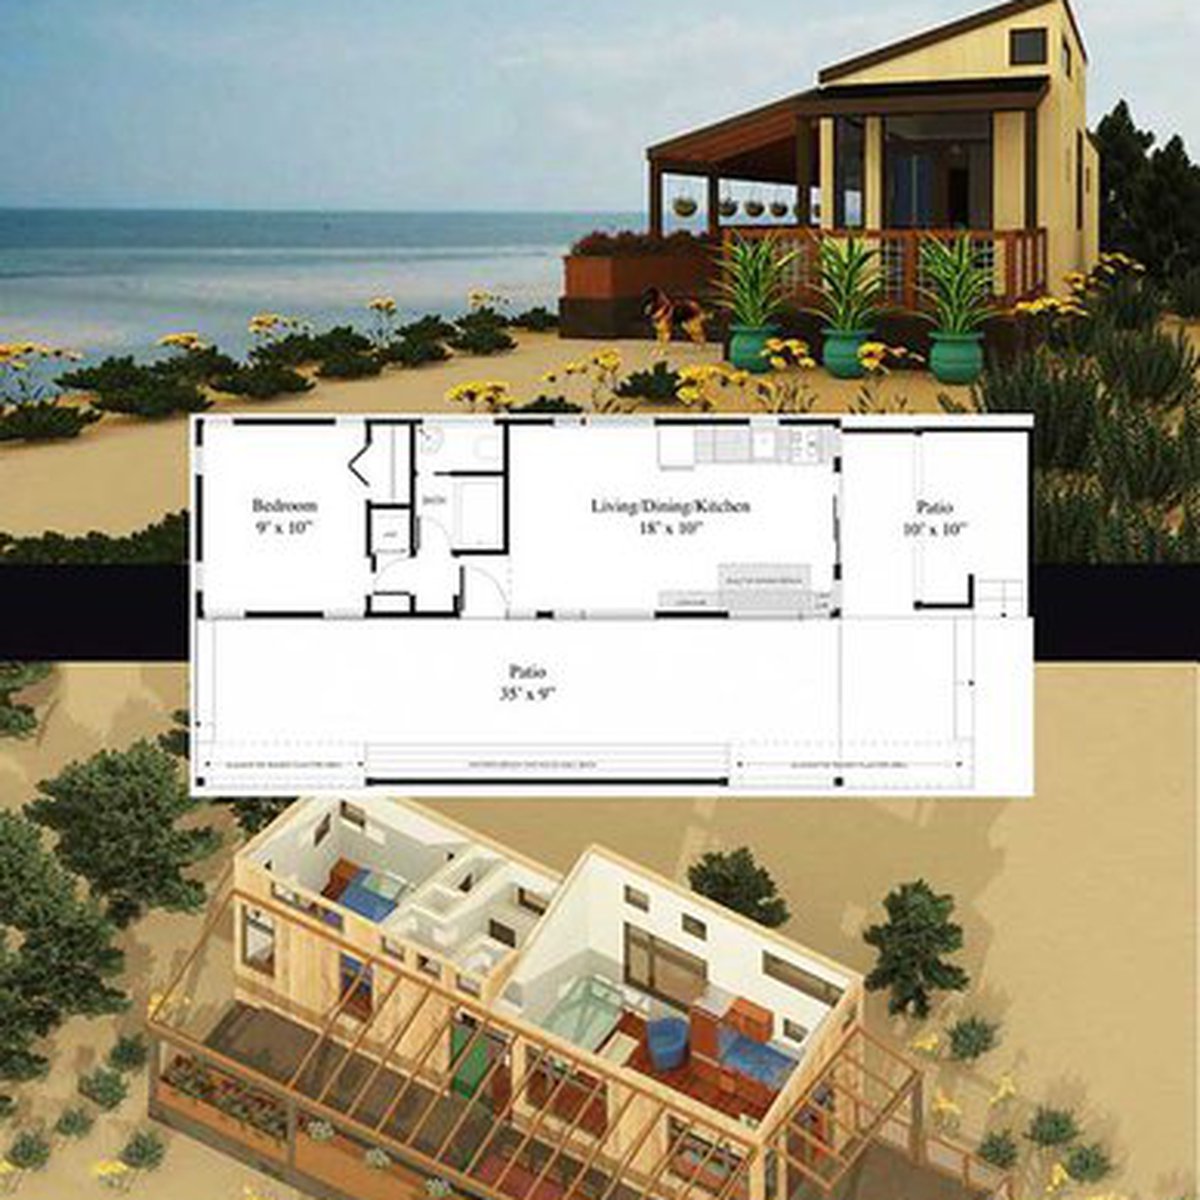 18BR Beach House with porch and patio Floor Plan   Floor Plans and ...